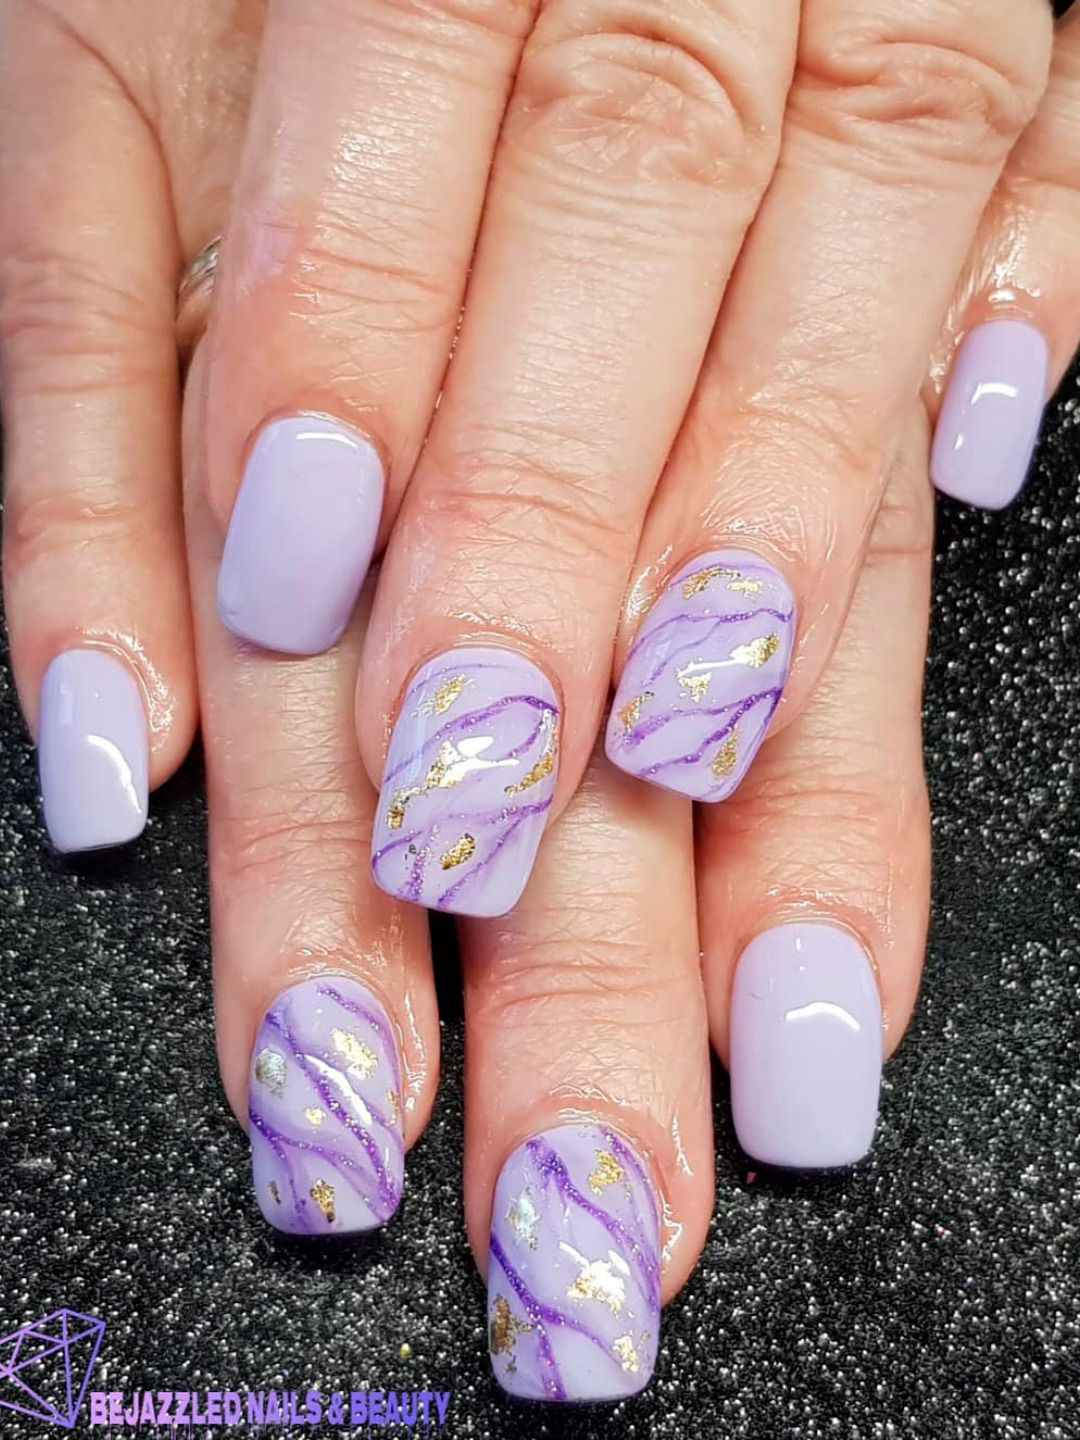 light purple marble nails - OFF-58% > Shipping free